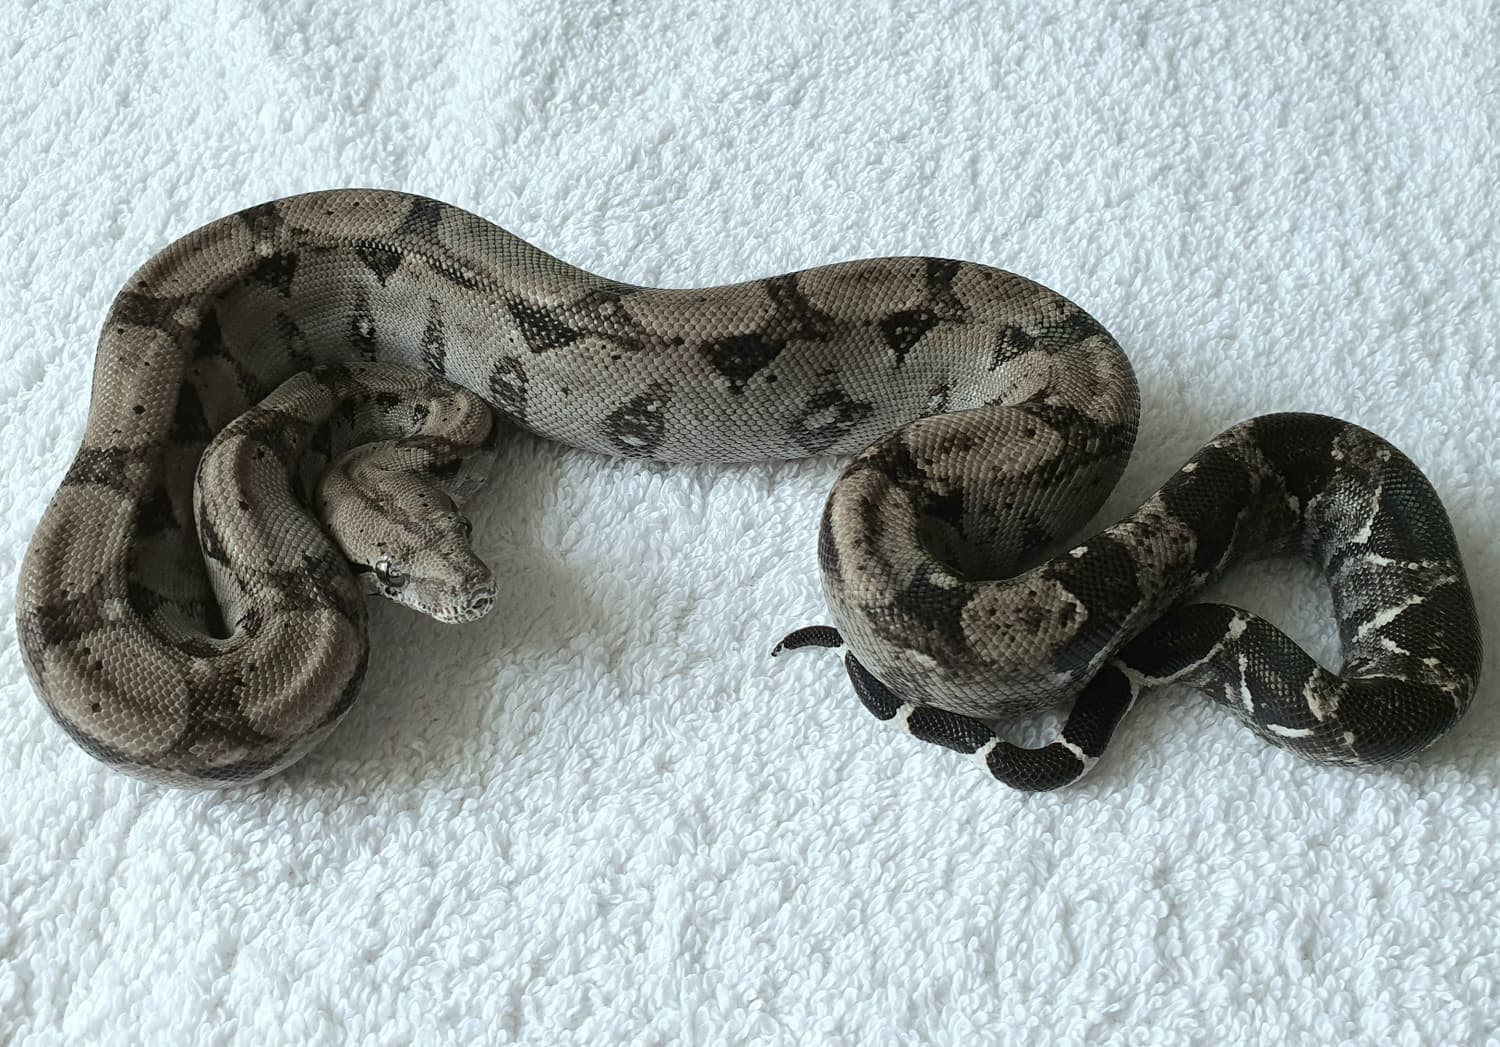 Pure Sonoran Type 2 Anery Boa Constrictor by South West Boids